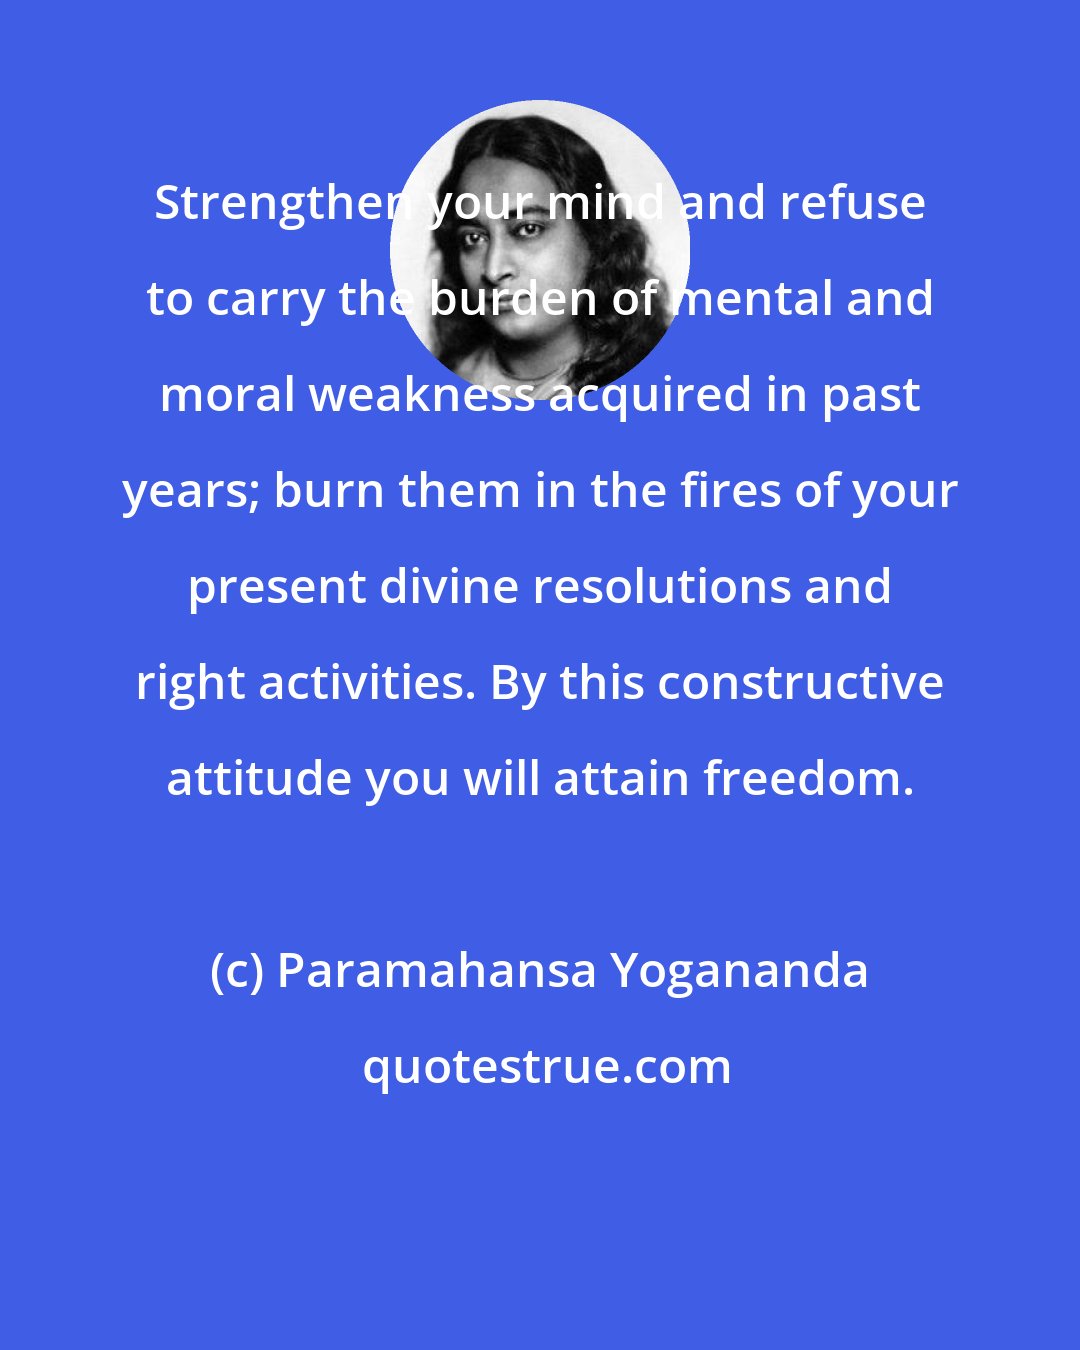 Paramahansa Yogananda: Strengthen your mind and refuse to carry the burden of mental and moral weakness acquired in past years; burn them in the fires of your present divine resolutions and right activities. By this constructive attitude you will attain freedom.